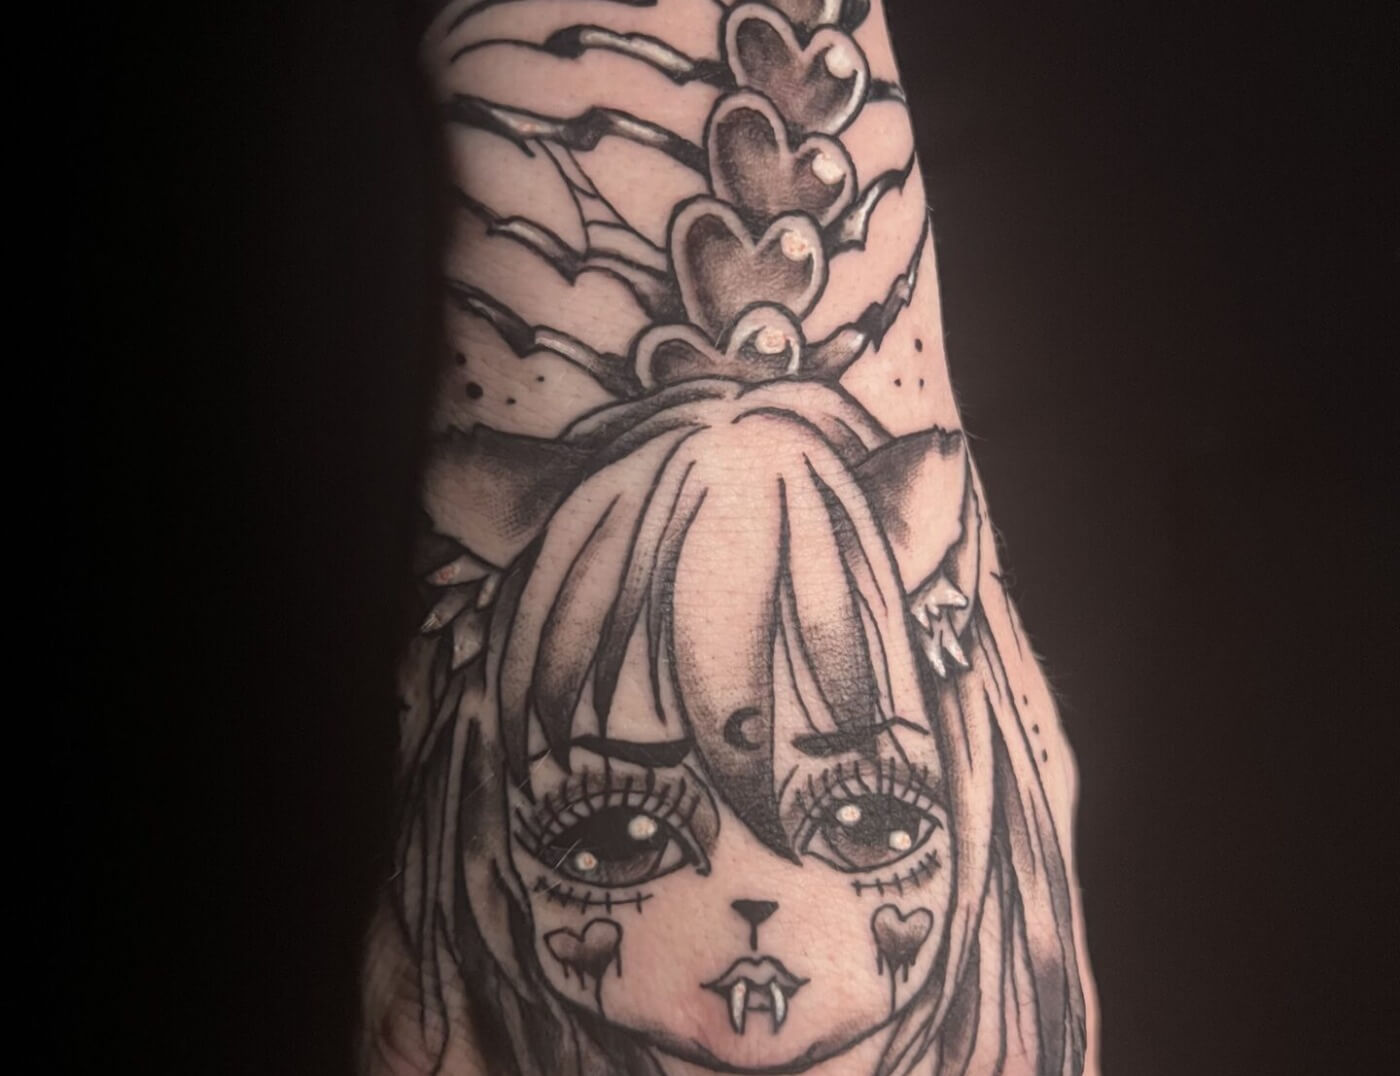 Large Forearm Anime tattoo at theYou.com